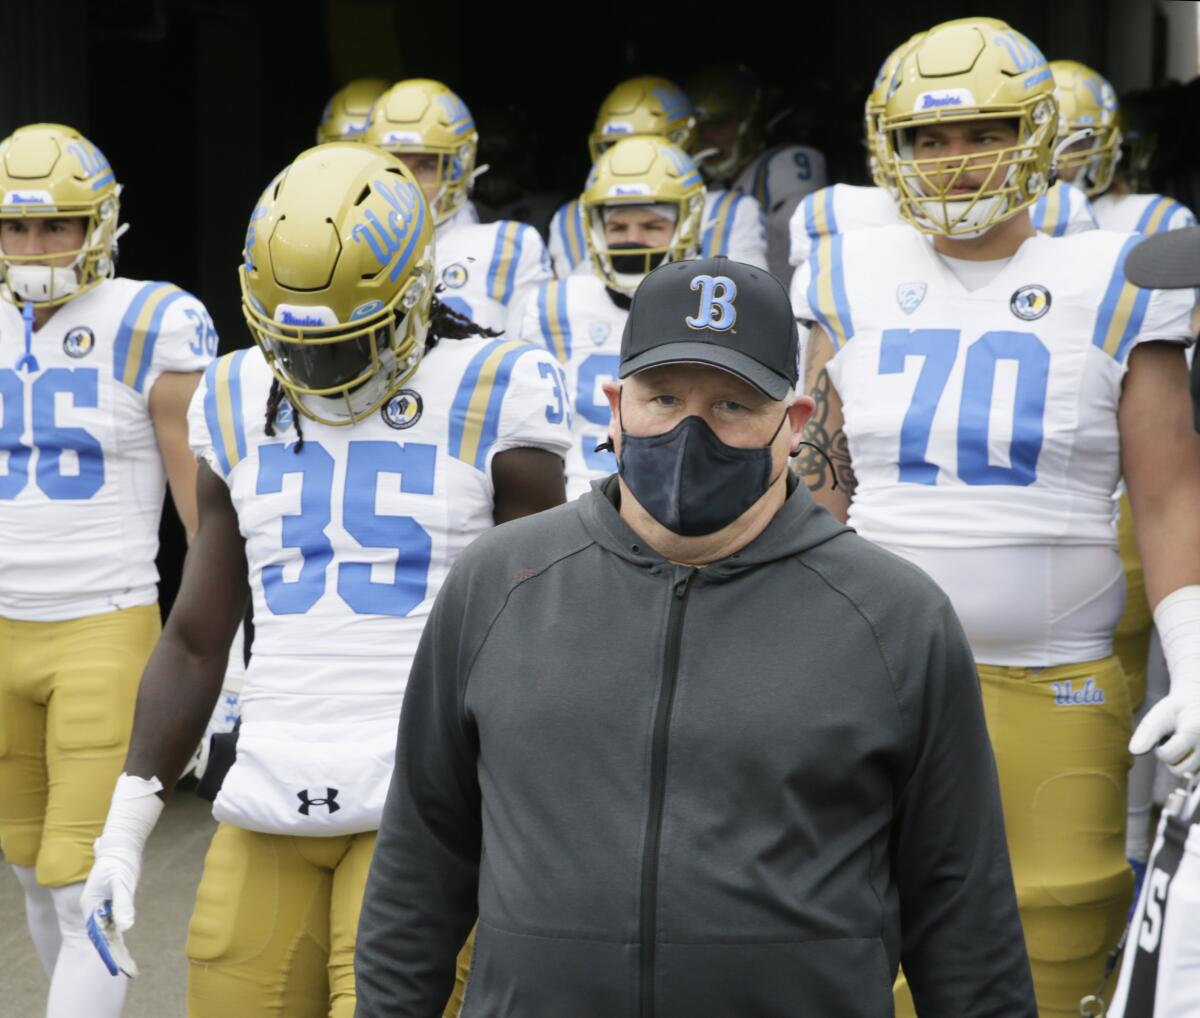 UCLA coach Chip Kelly leads his team on the field before its game against Oregon on Nov. 21, 2020, in Eugene, Ore.